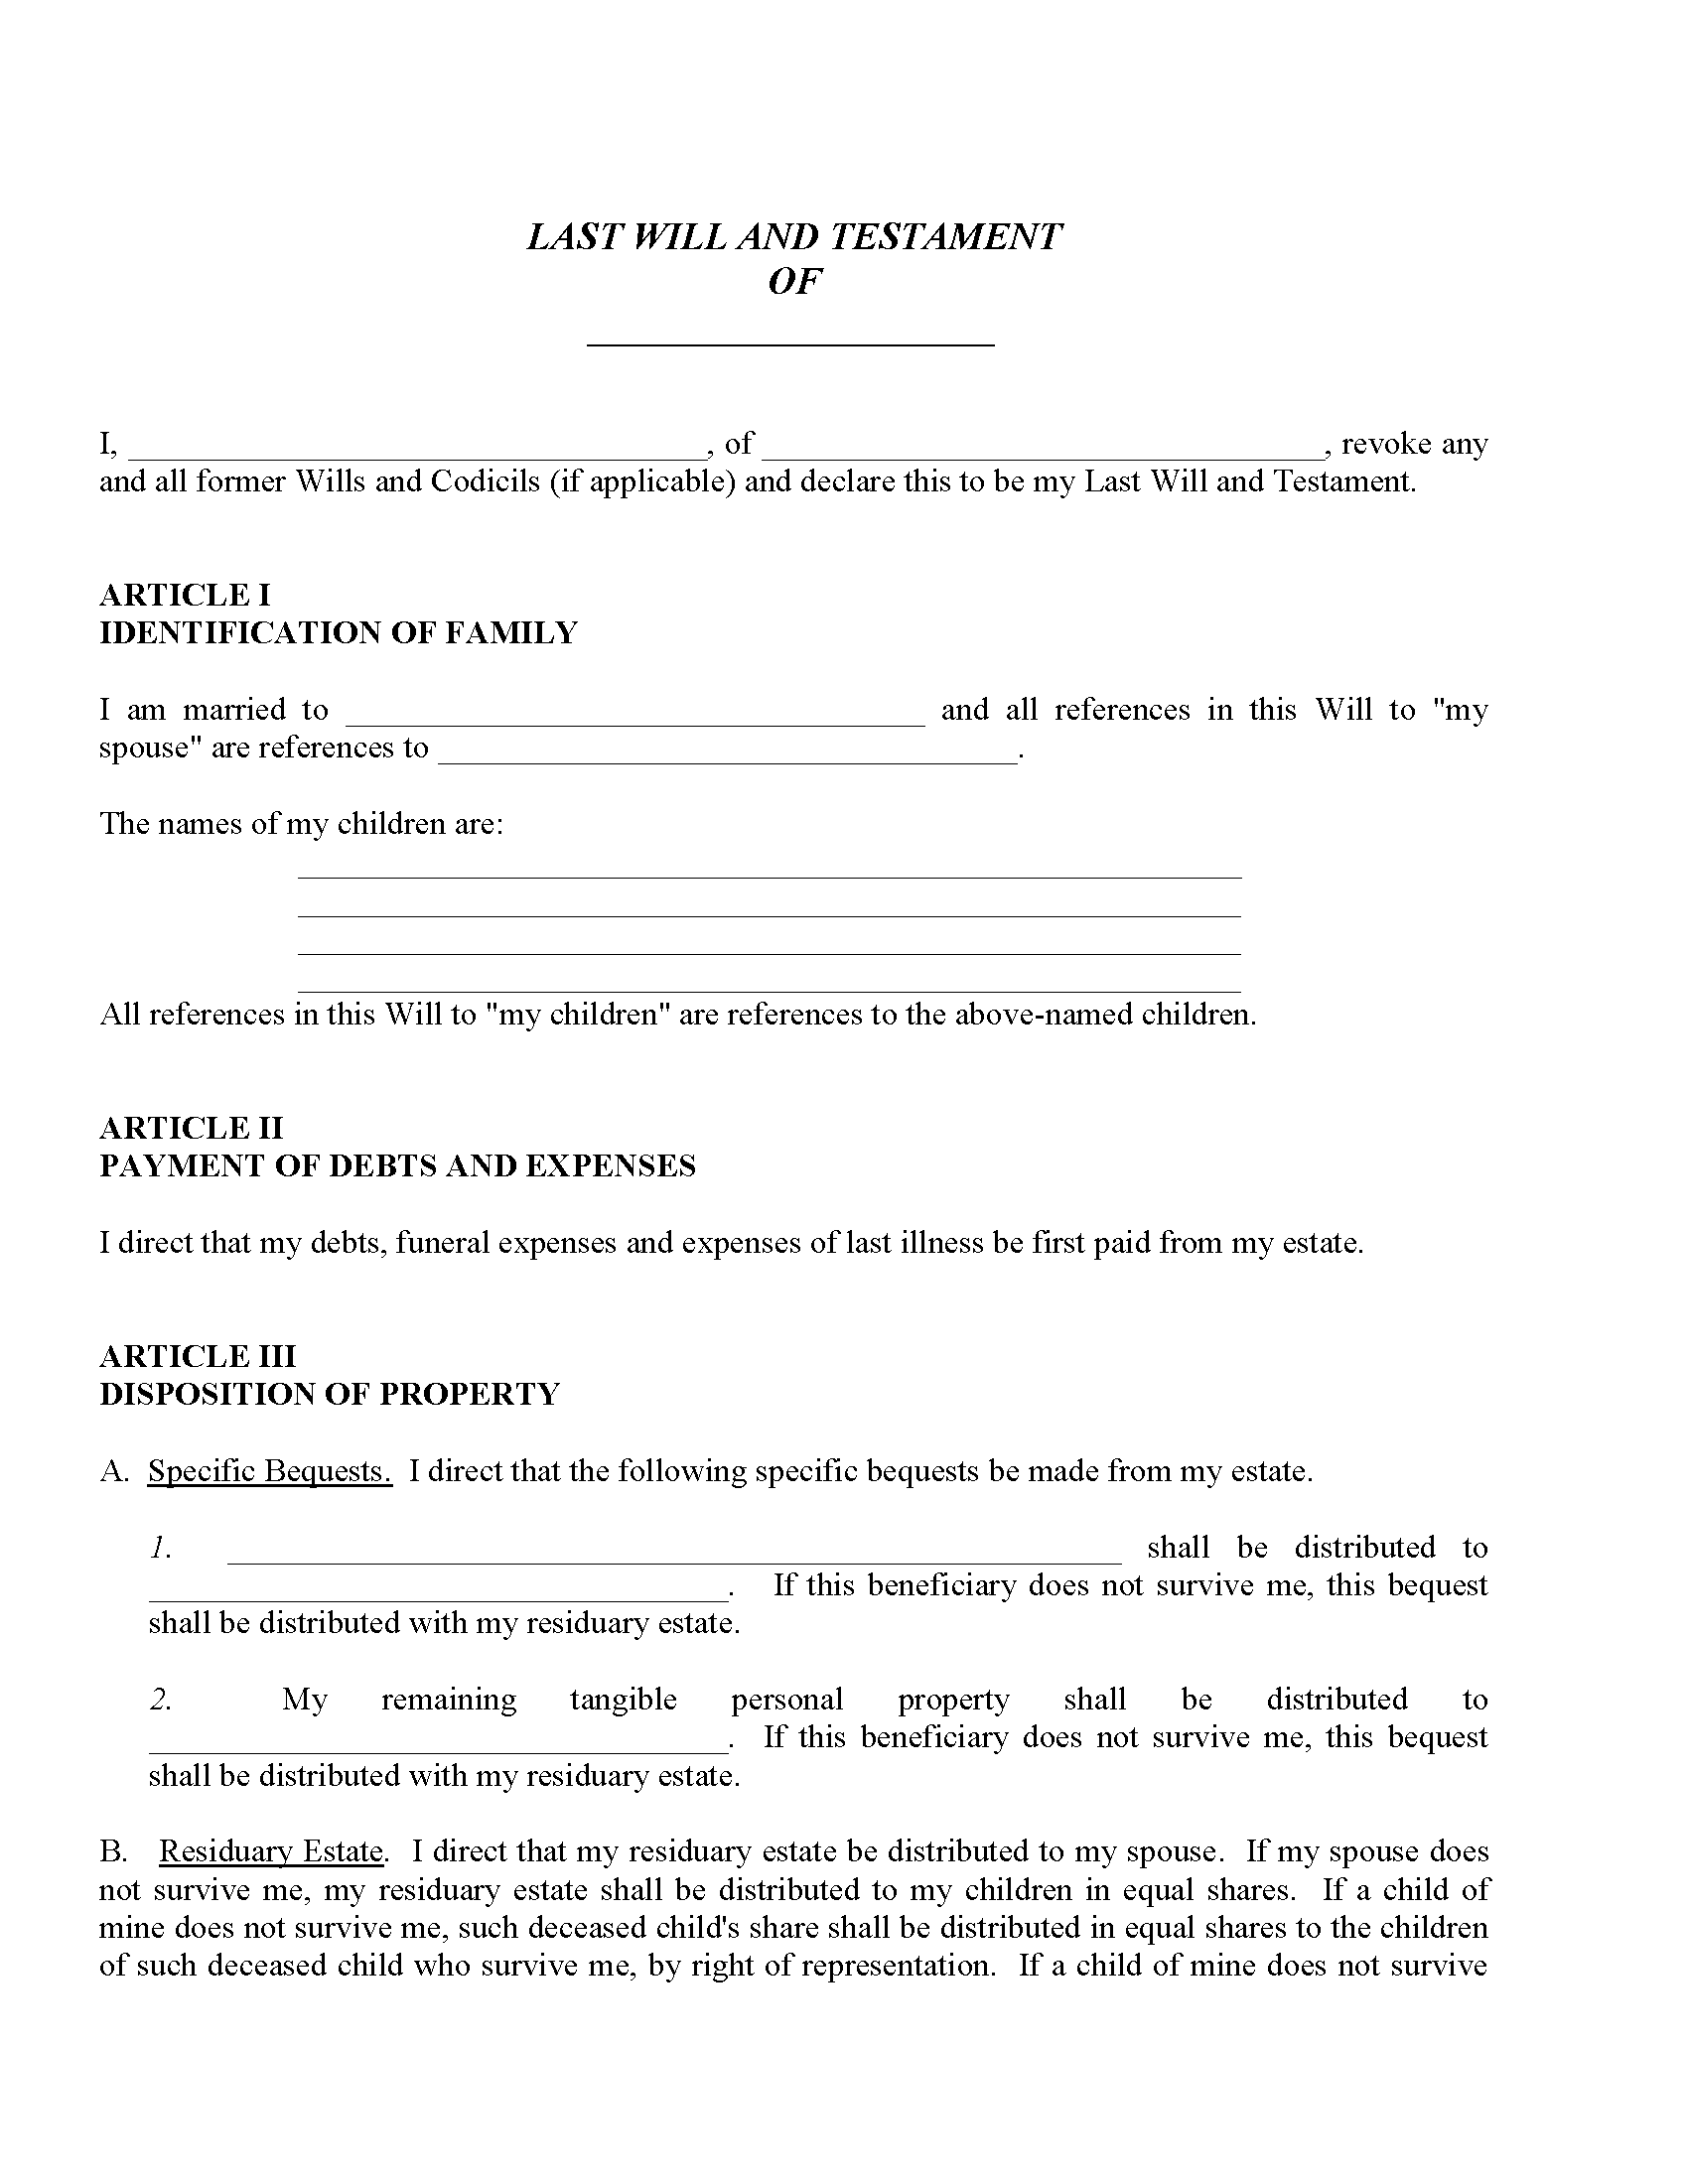 california-last-will-and-testament-free-printable-legal-forms